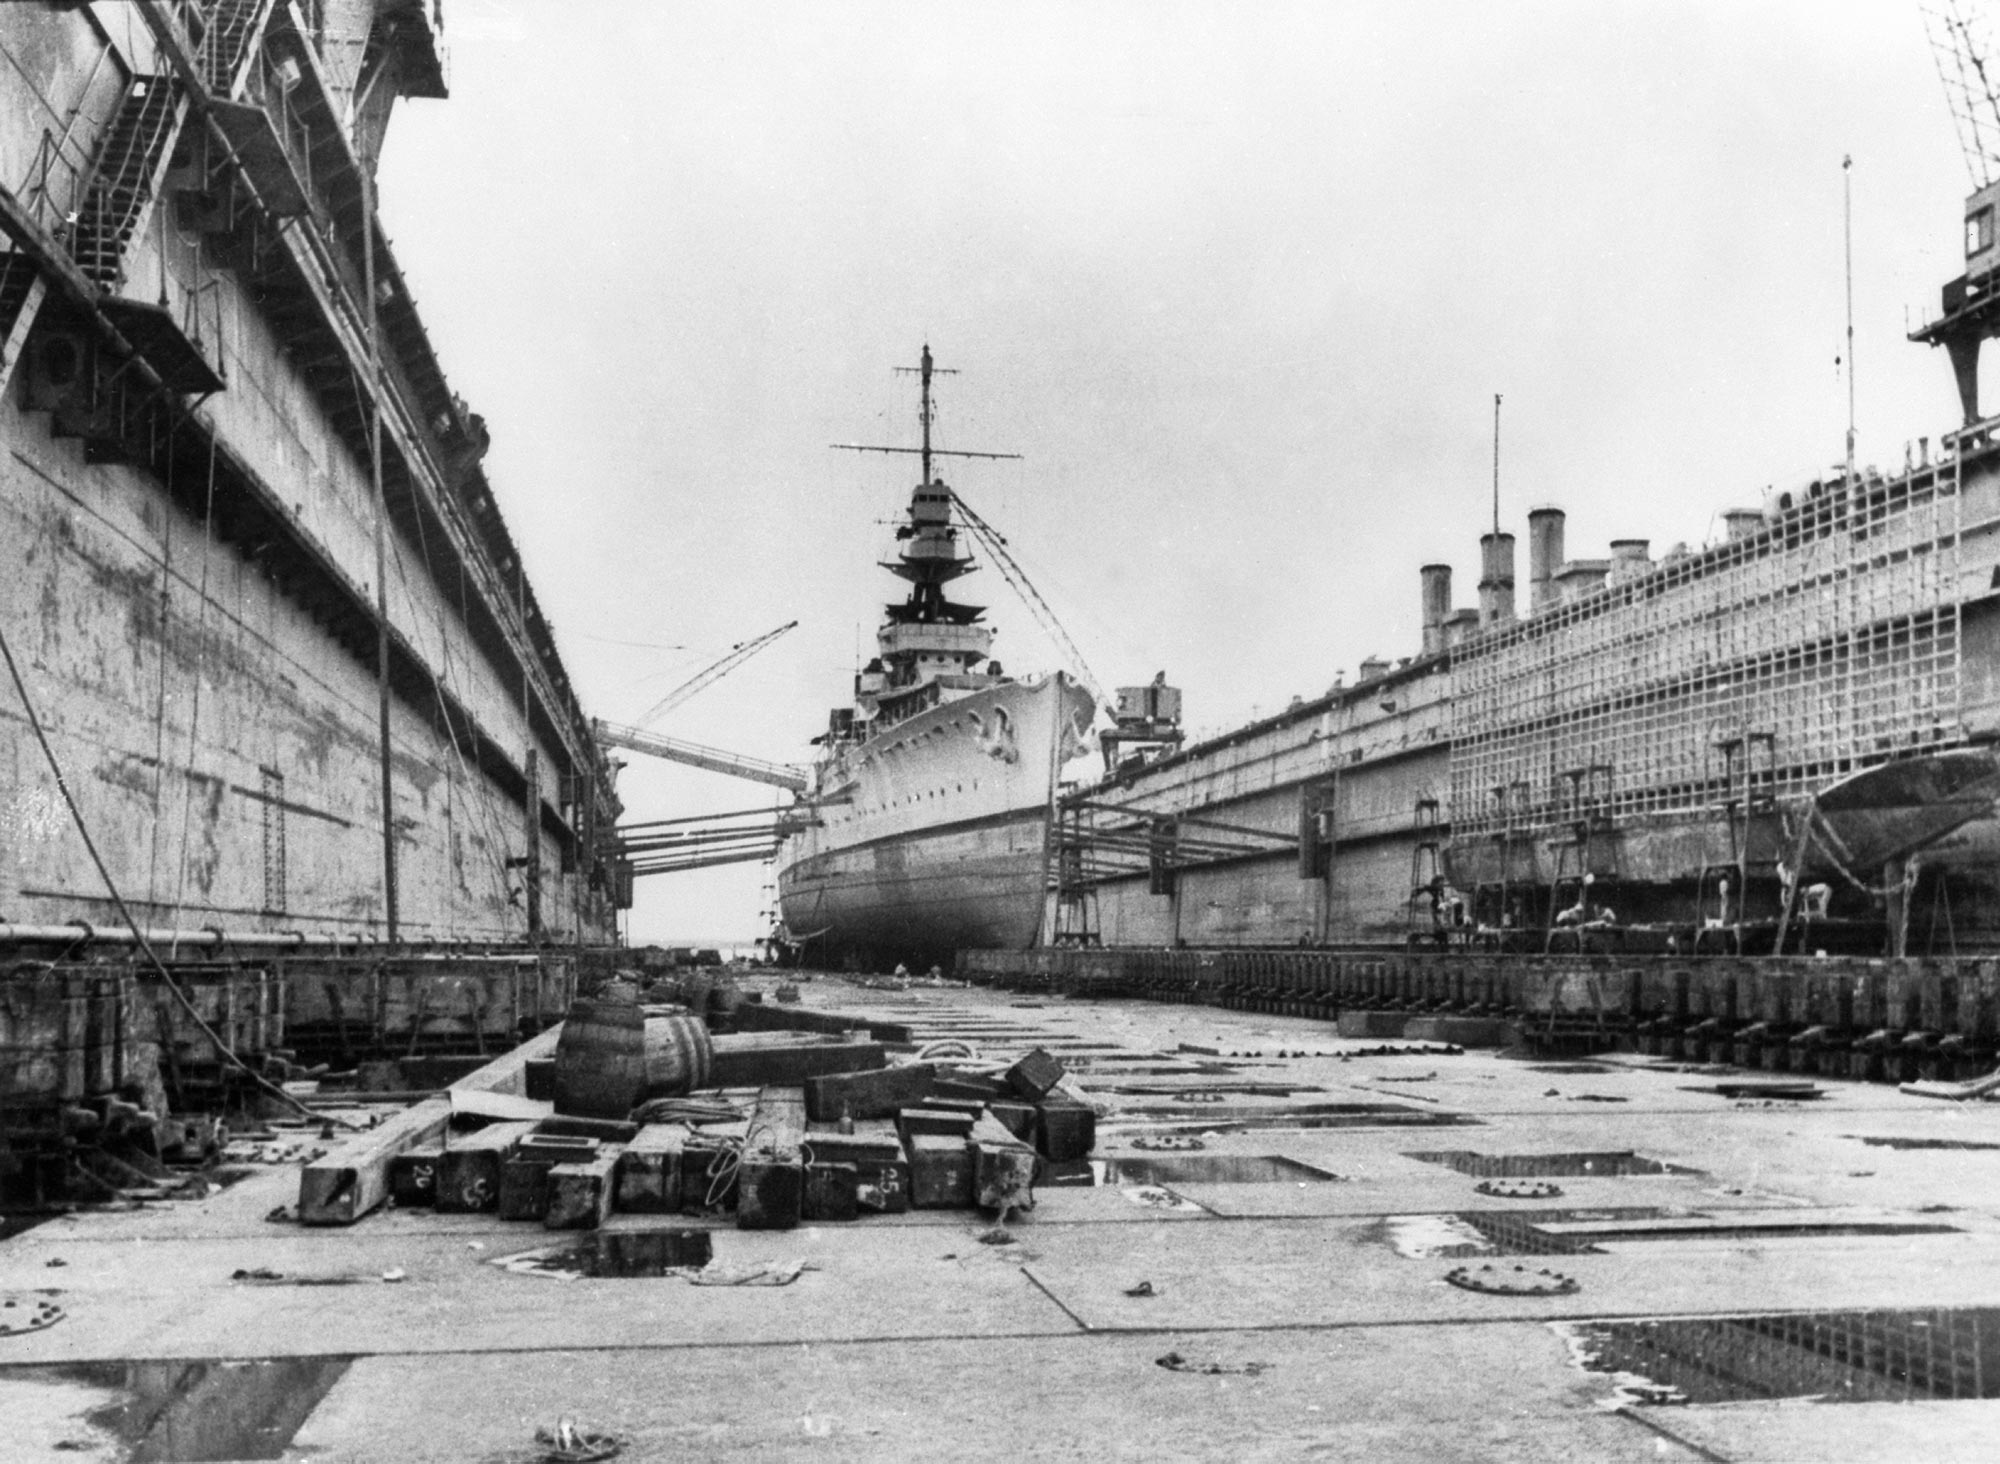 A British warship being refit ted in a floating dock at Singapore naval base, 1940s.